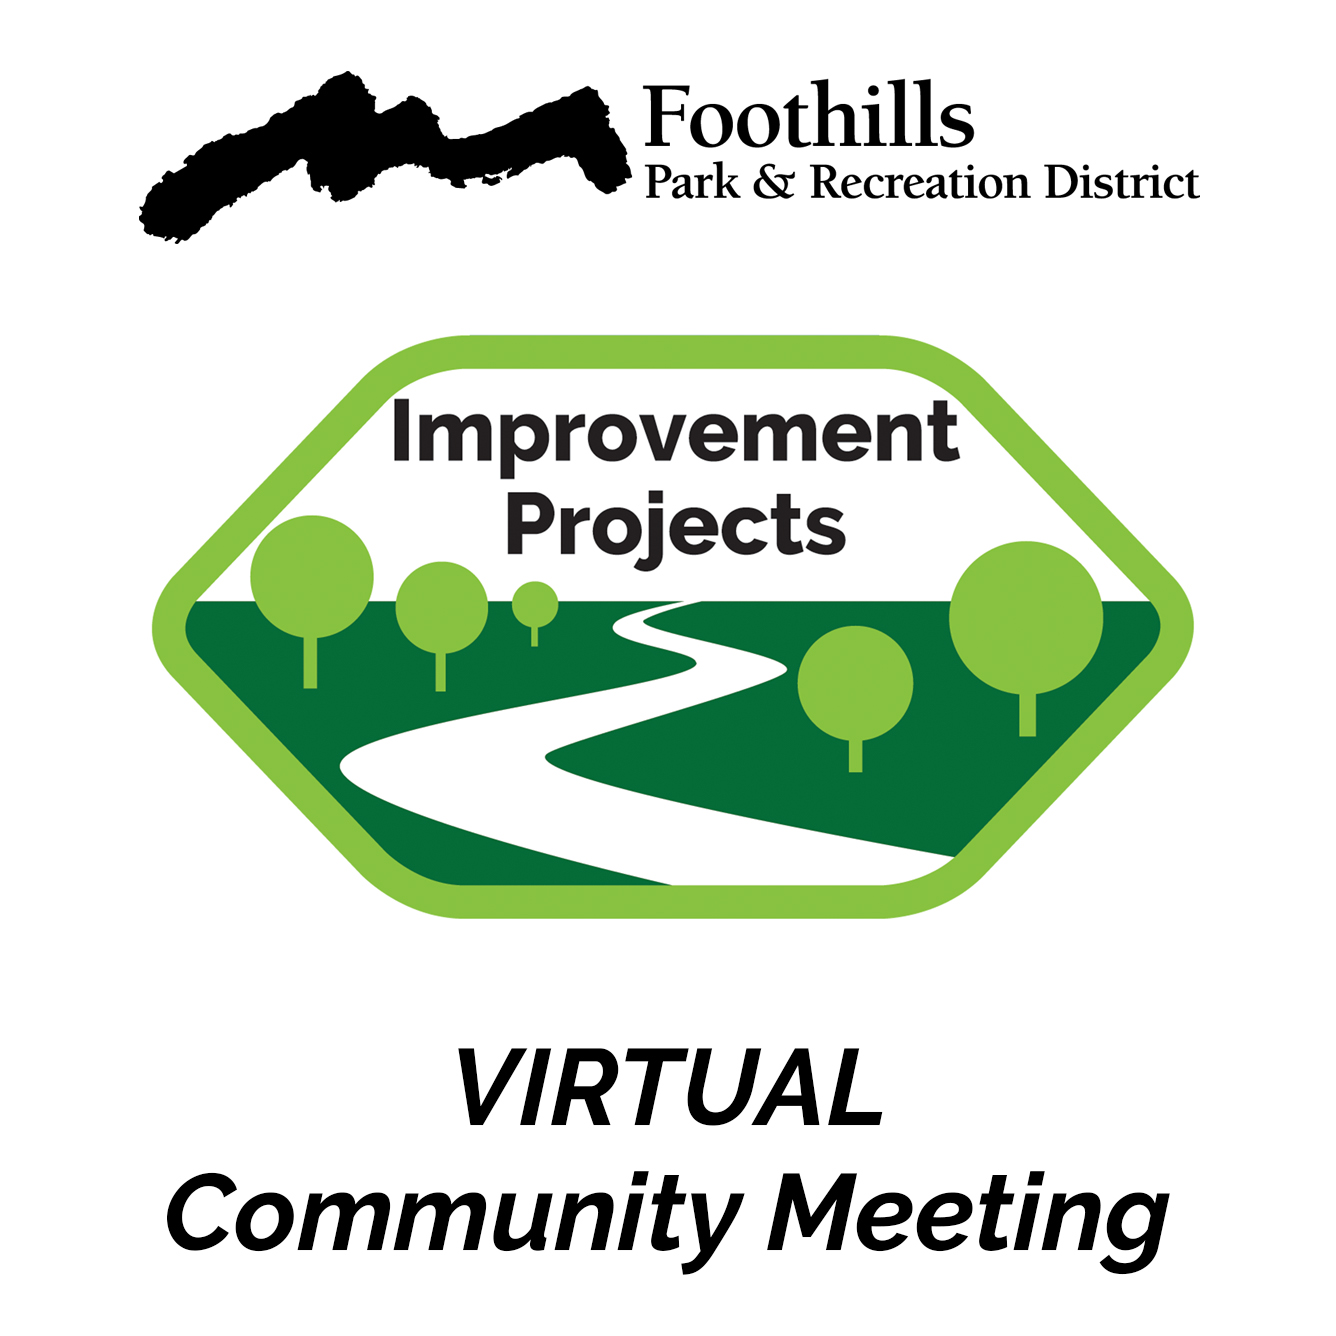 Virtual Community Meeting for Improvement Projects